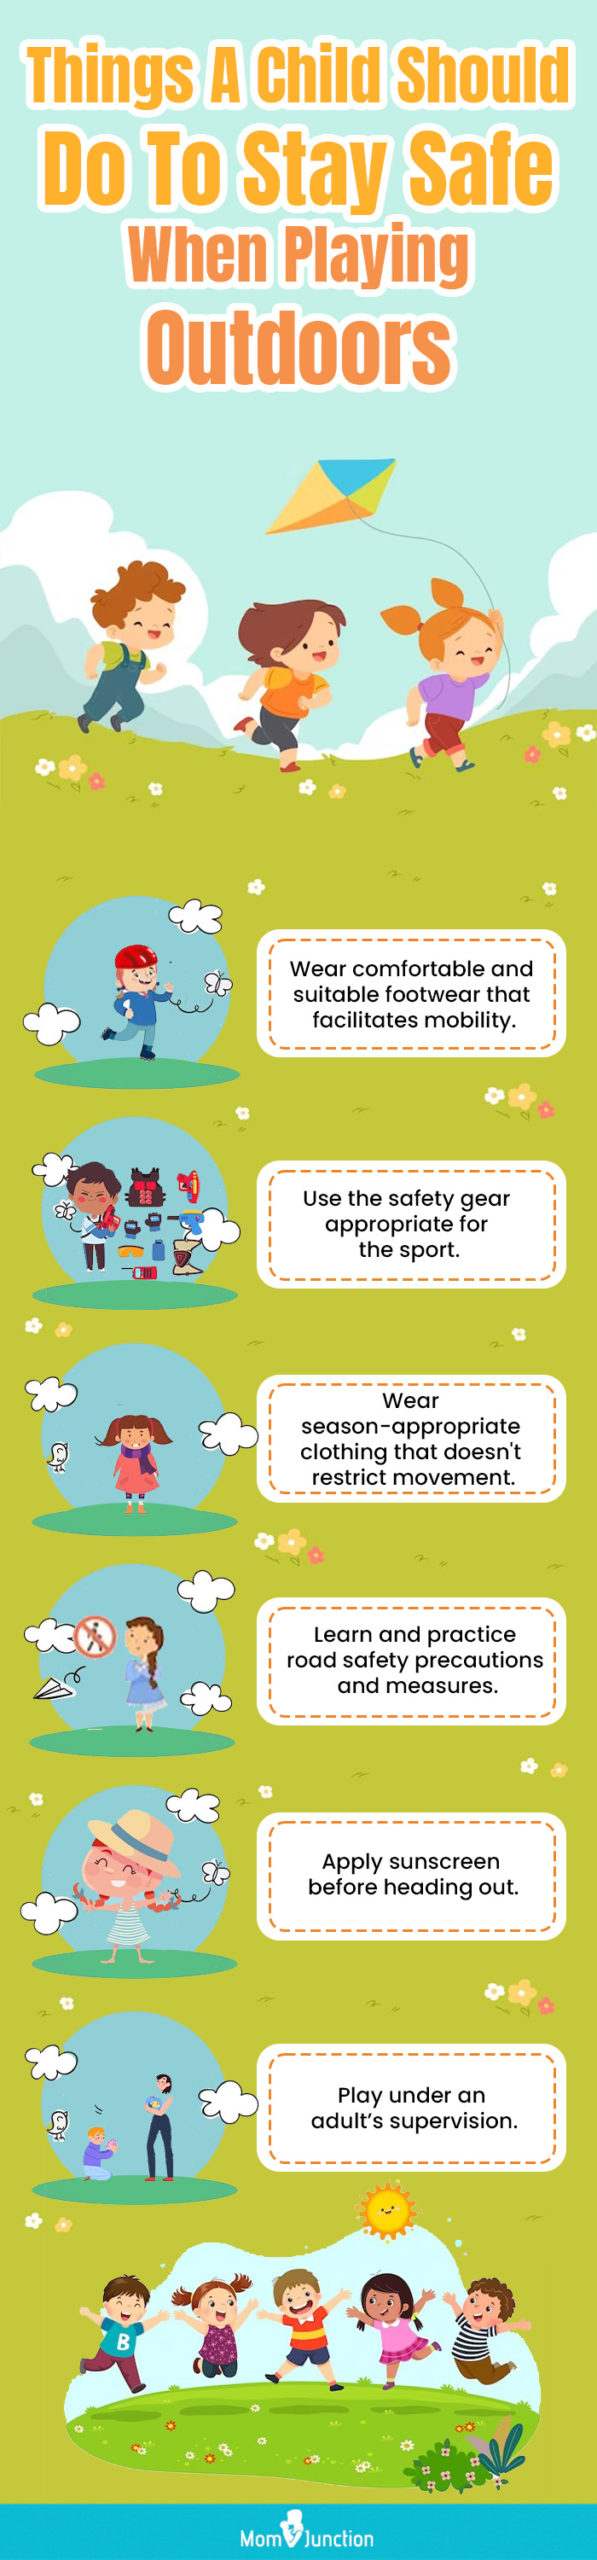 Things A Child Should Do To Stay Safe When Playing Outdoors-Recovered (infographic)